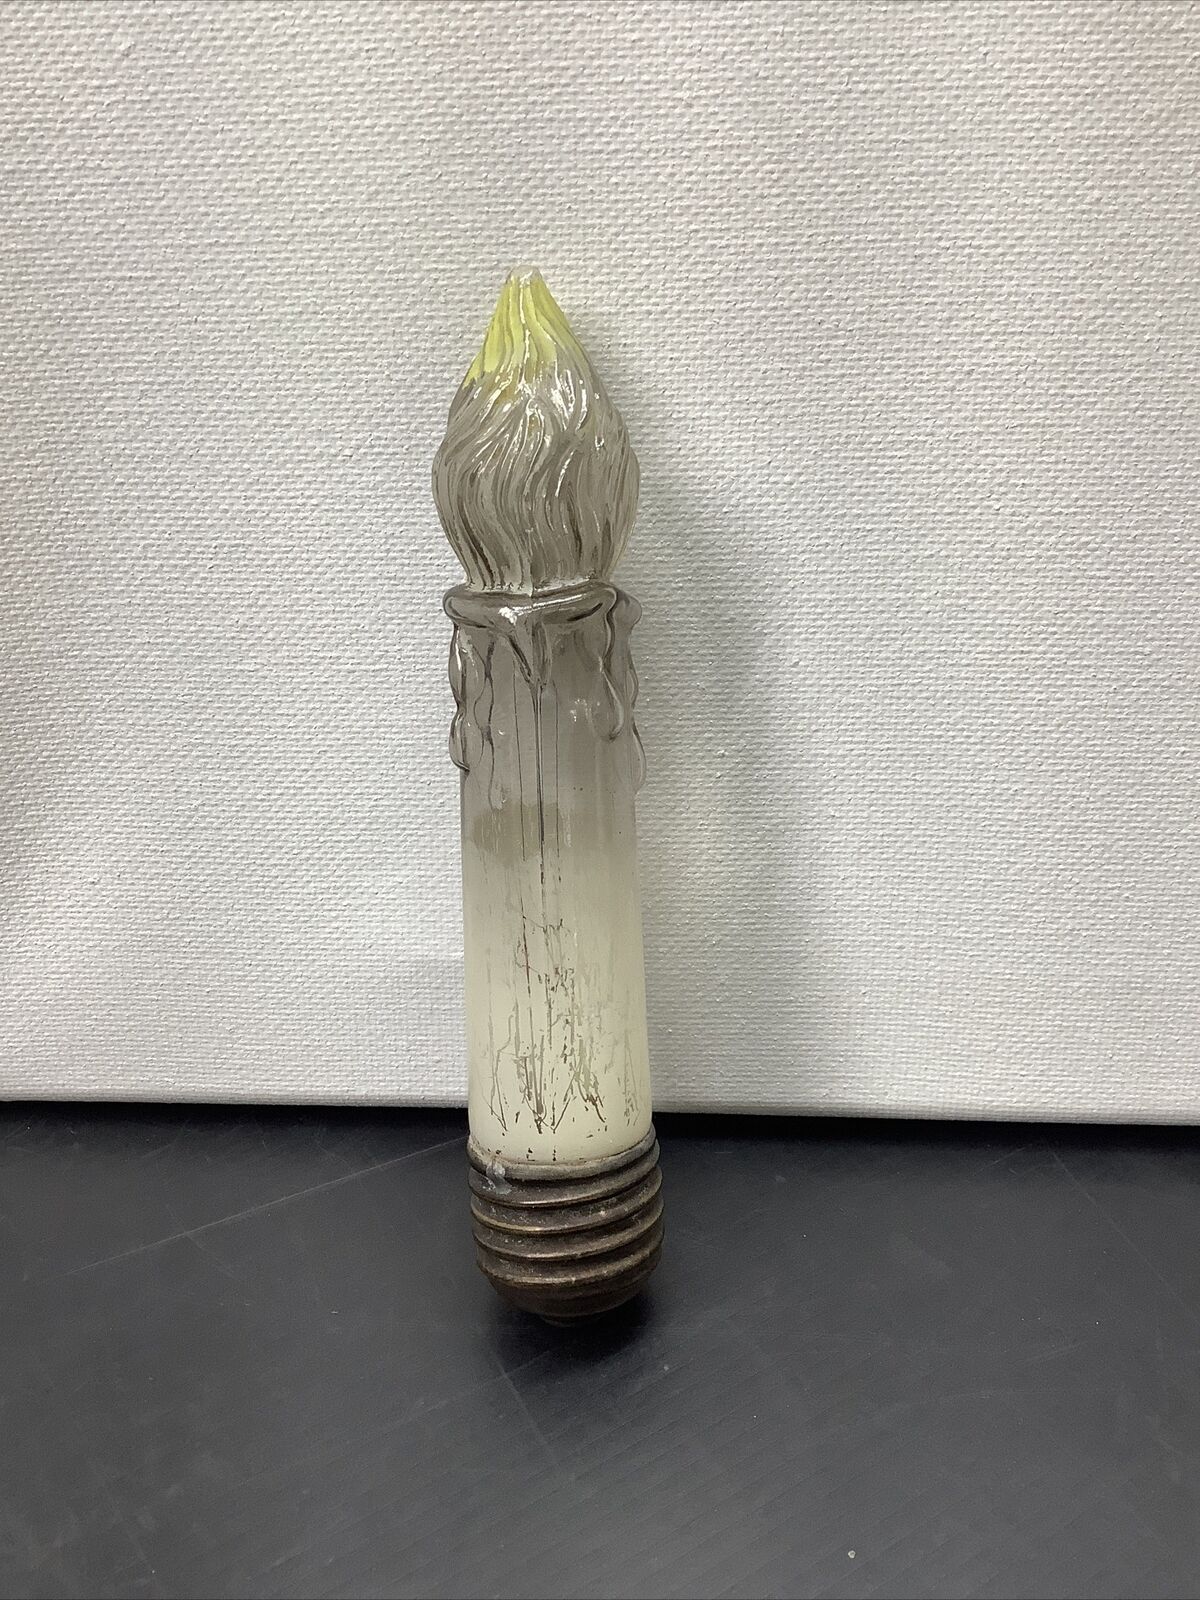 RARE Antique Christmas Candle Dripping Wax glass Light Bulb, Works